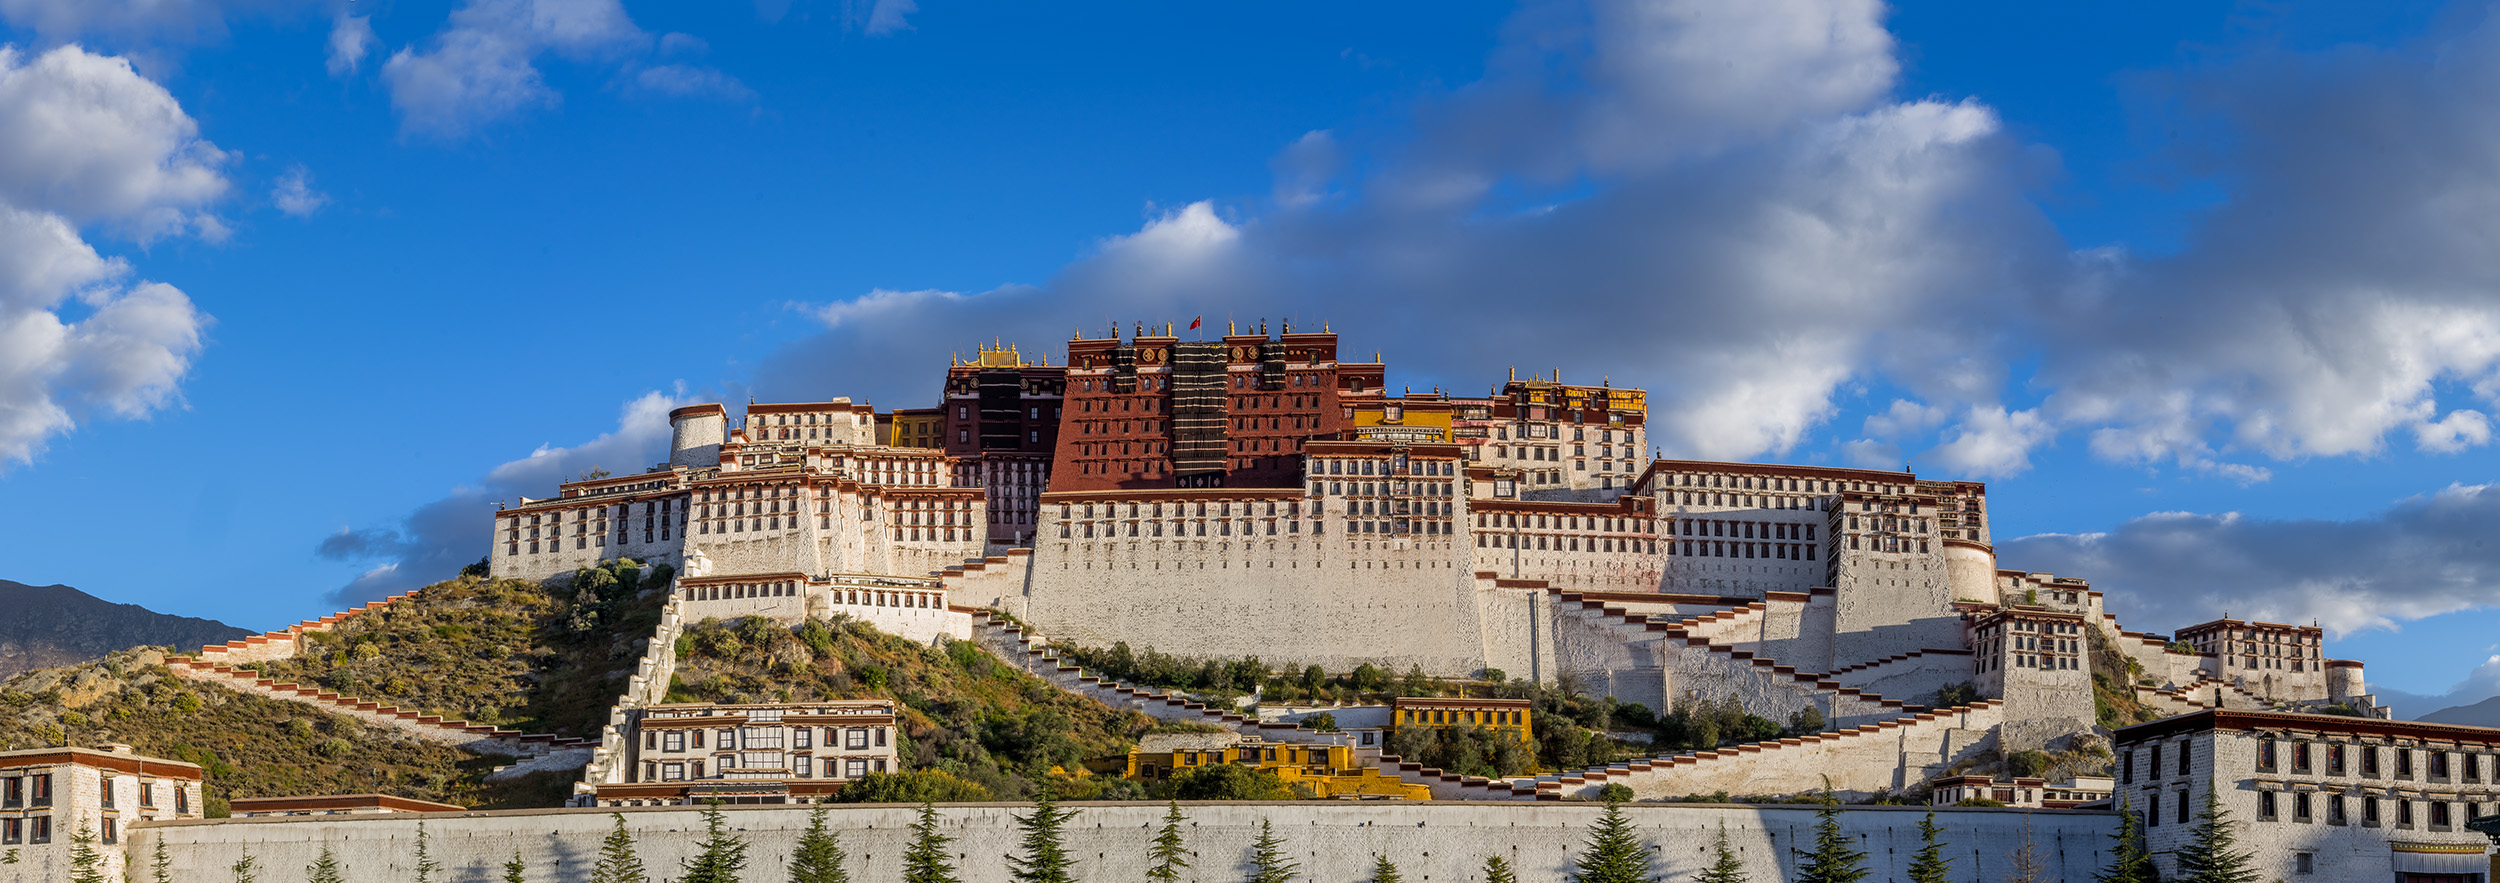 This panoramic image, captured from the iconic Potala Palace in Lhasa, Tibet, offers an unobstructed view of this architectural...